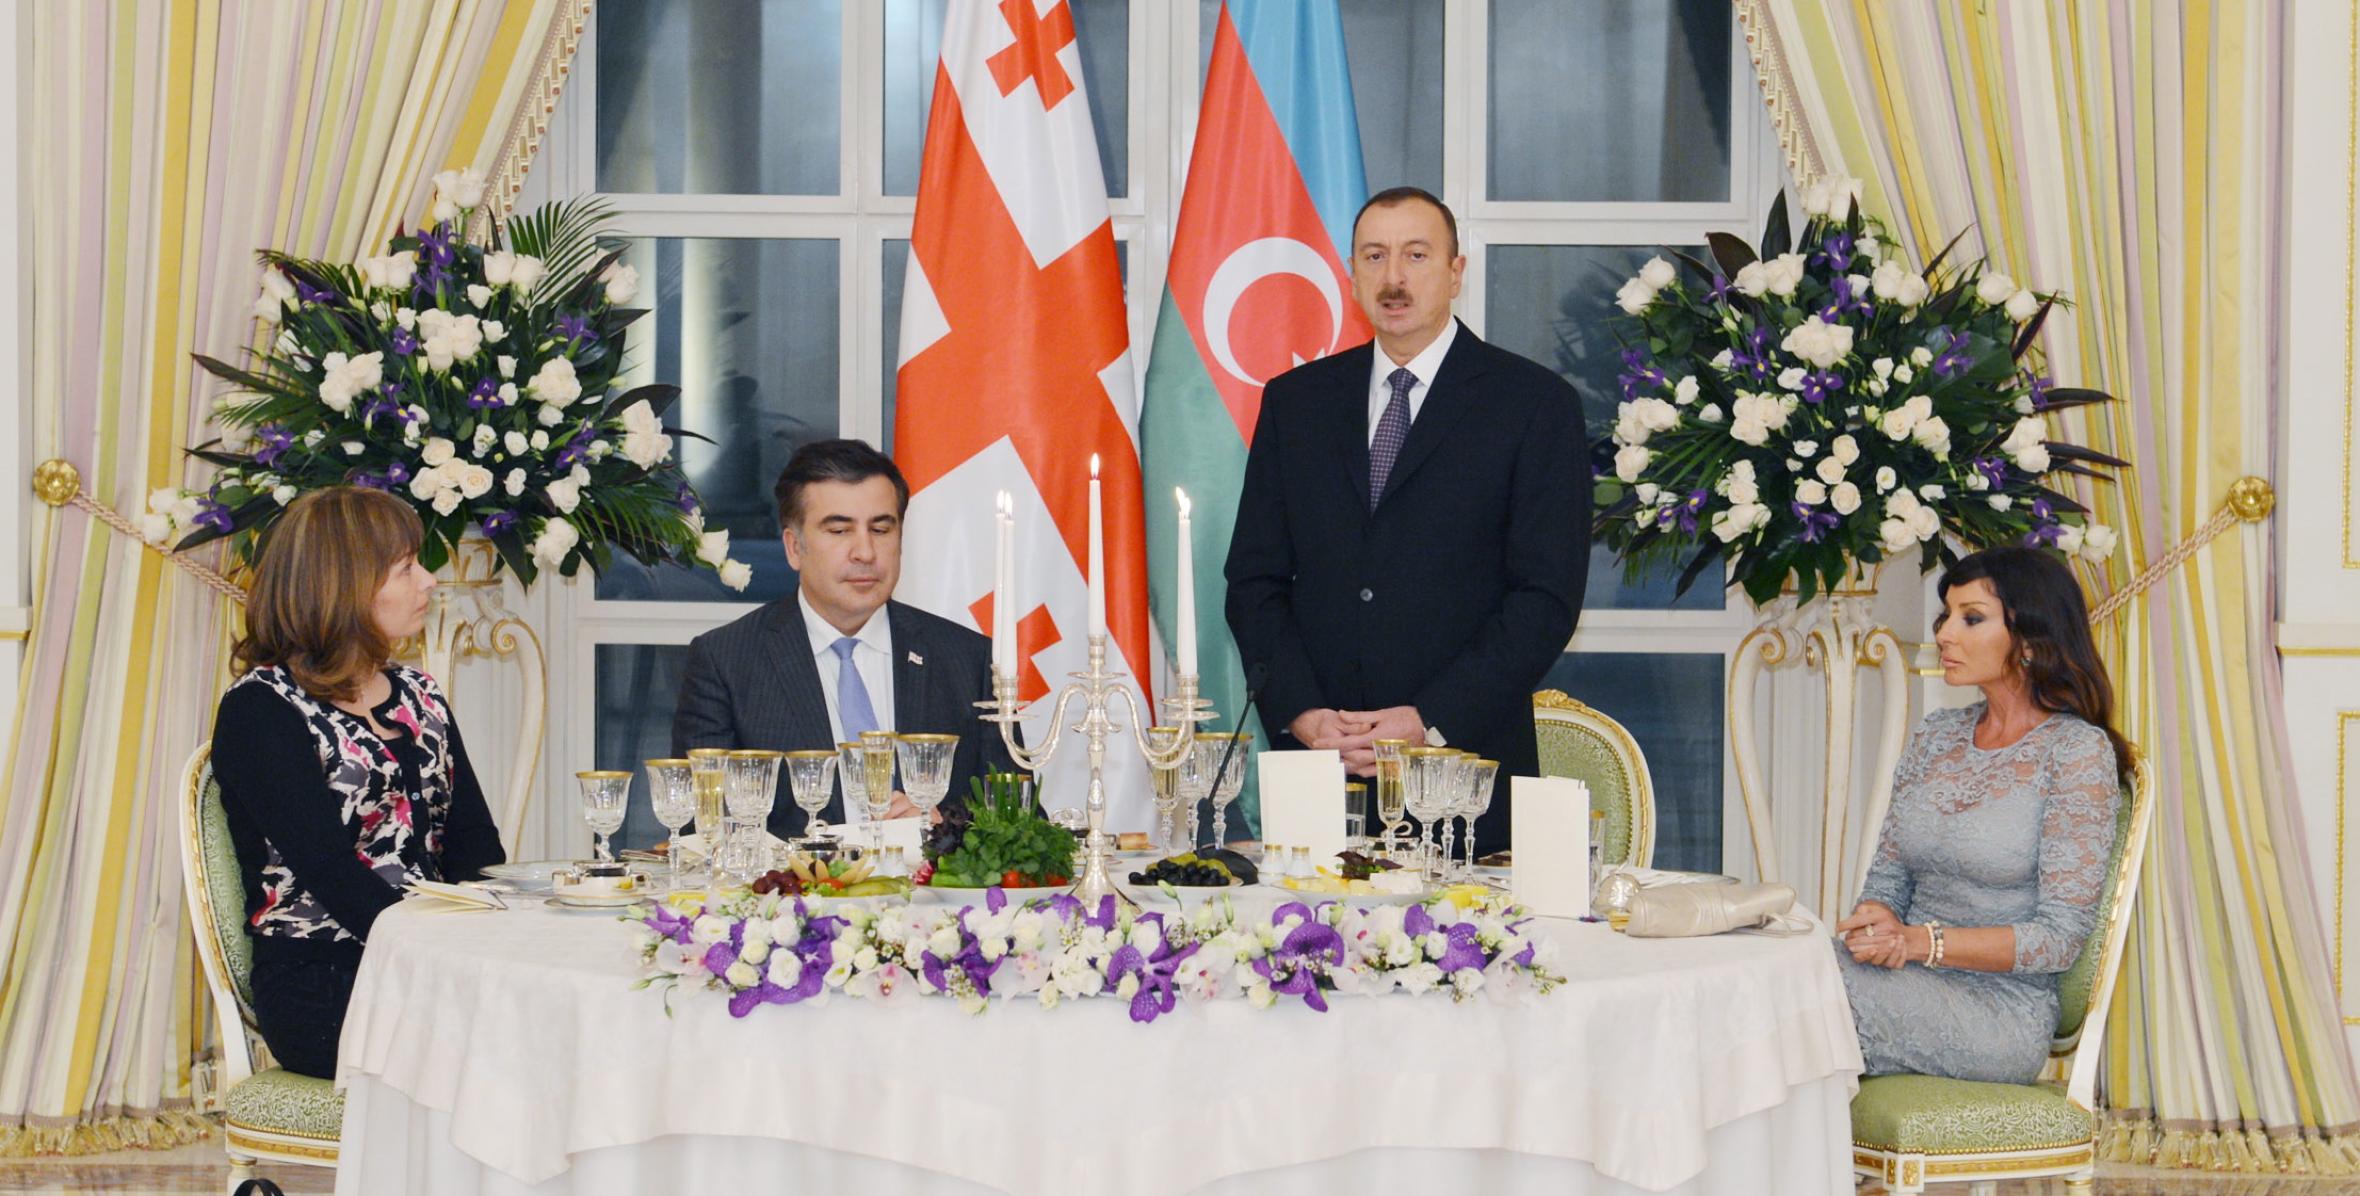 President Ilham Aliyev hosted an official reception in honor of President of Georgia Mikheil Saakashvili